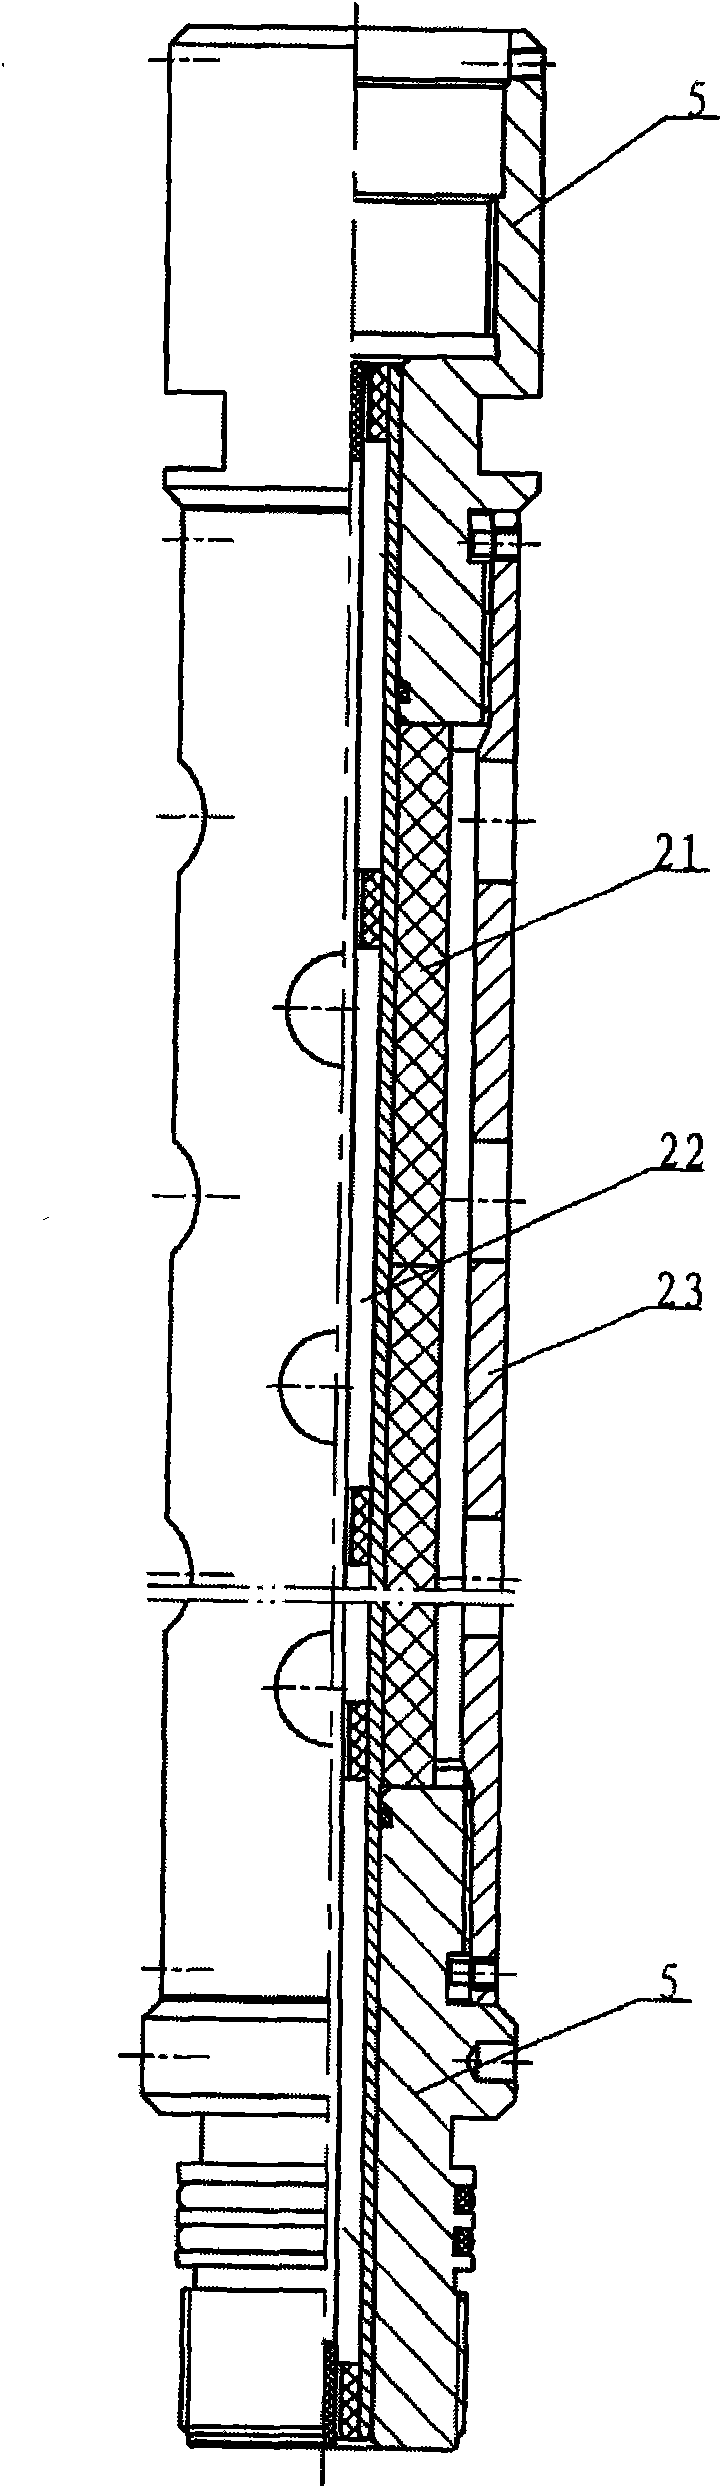 Pulse fracturing sand injector for horizontal wells